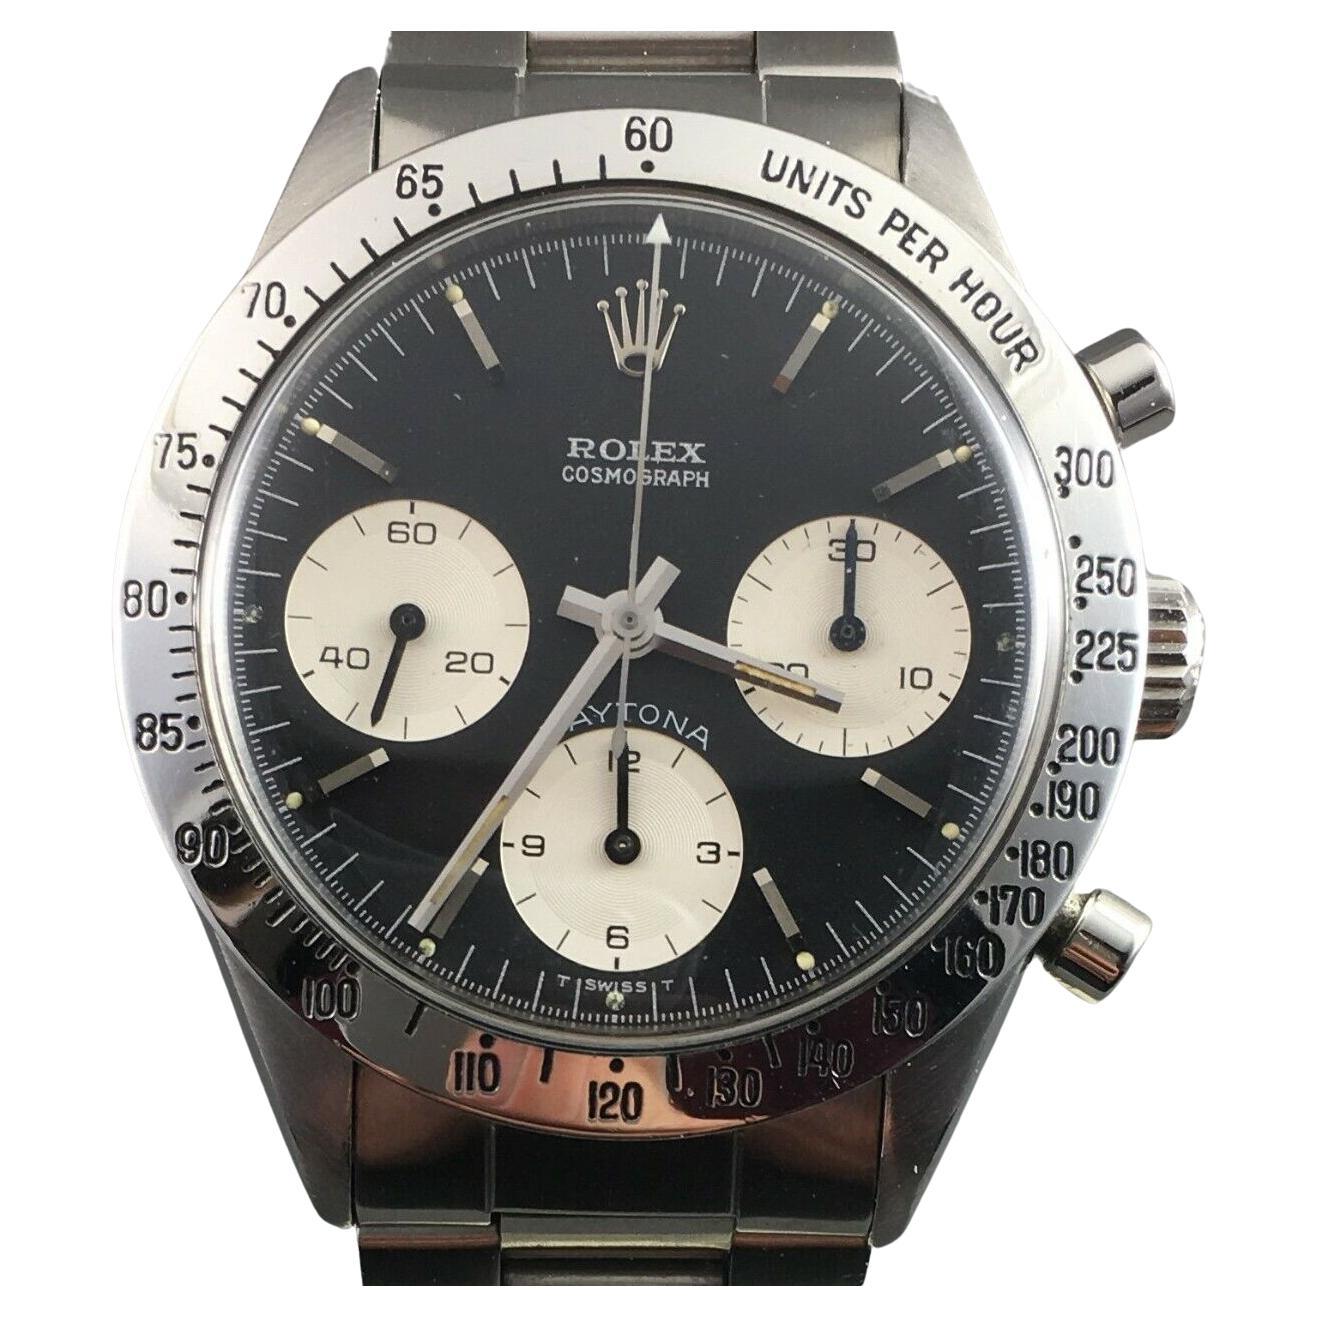 What are the dials on Daytona watches?